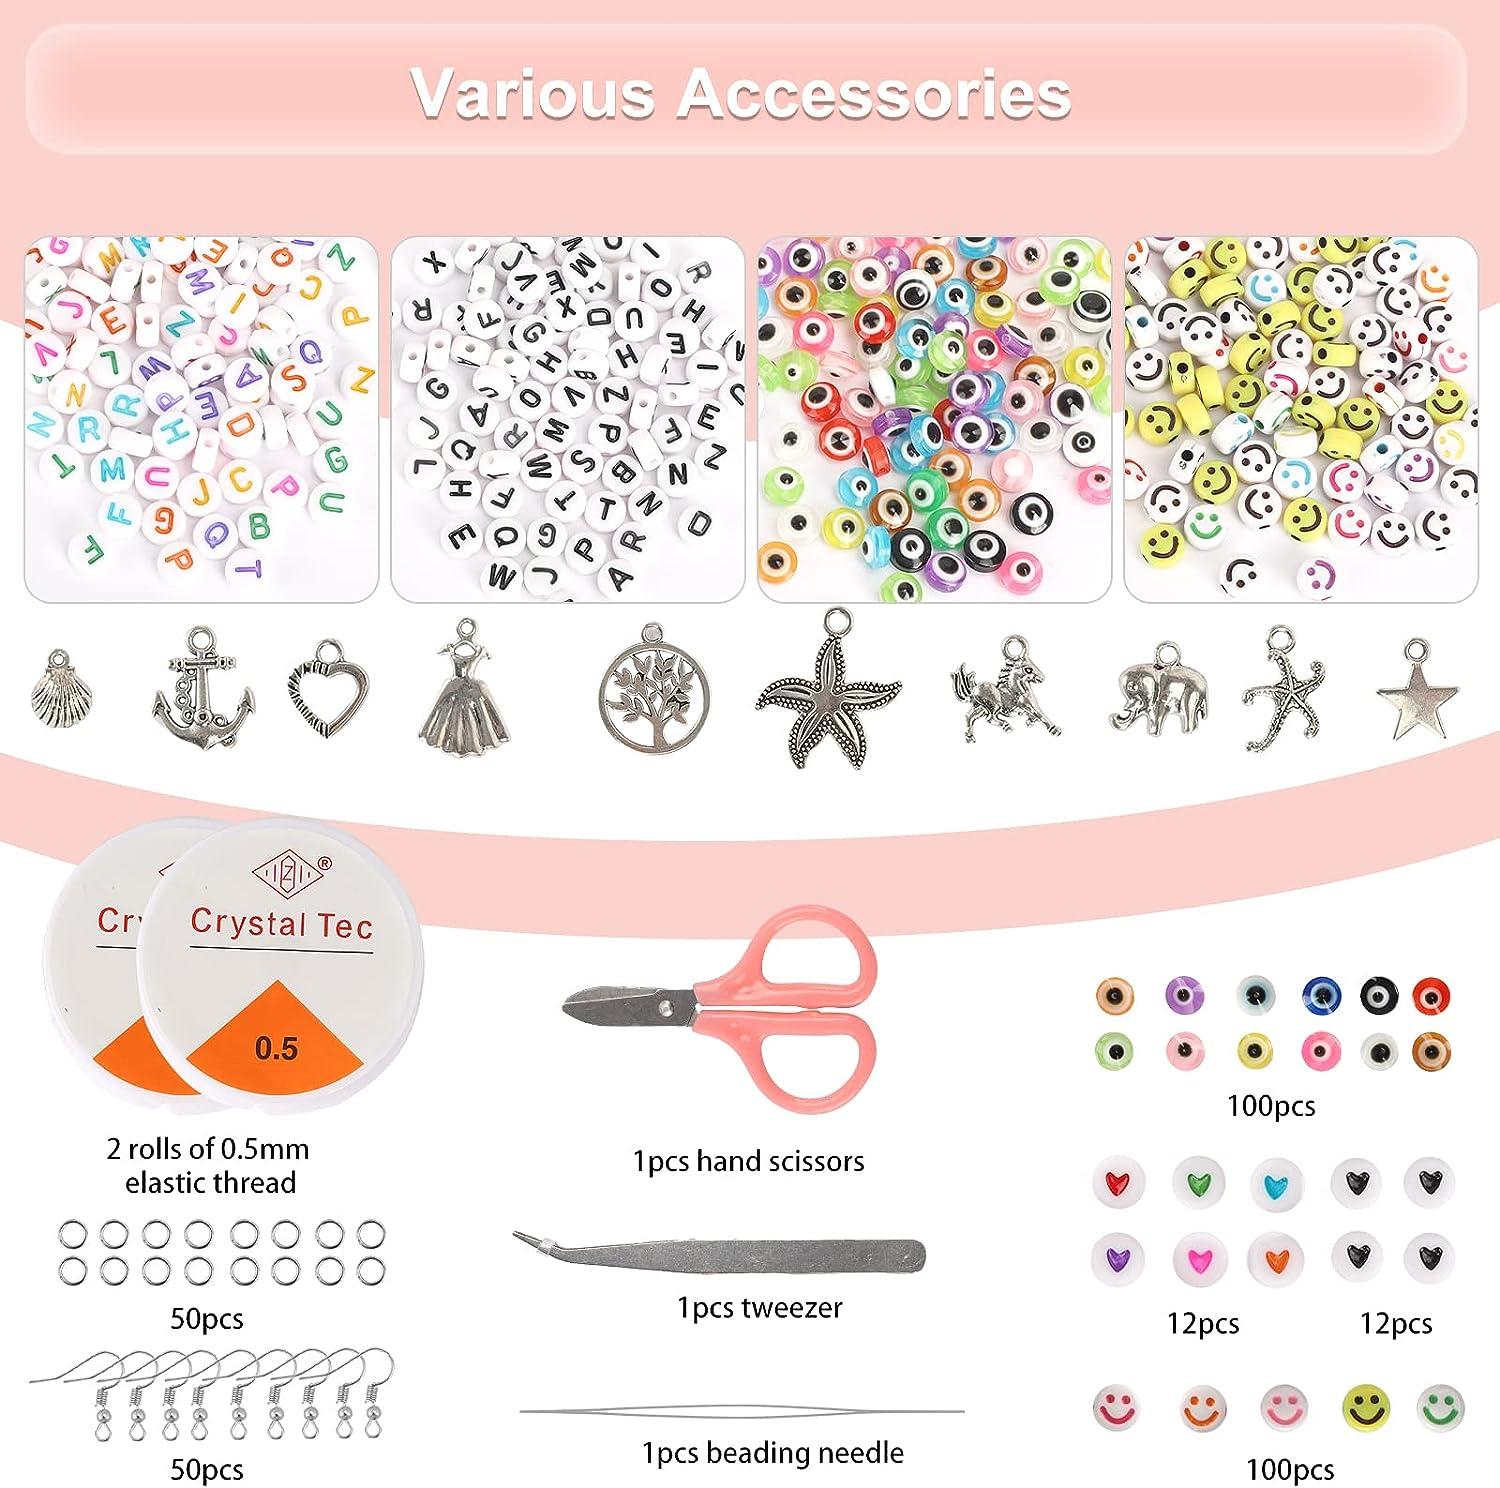 QUEFE 40000pcs 2mm Glass Seed Beads for Jewelry Making Kit 440pcs Letter  Beads 100pcs Smiley Face Beads & 100pcs Evil Eye Beads for Bracelets  Necklace Ring Making DIY Art Craft Gifts